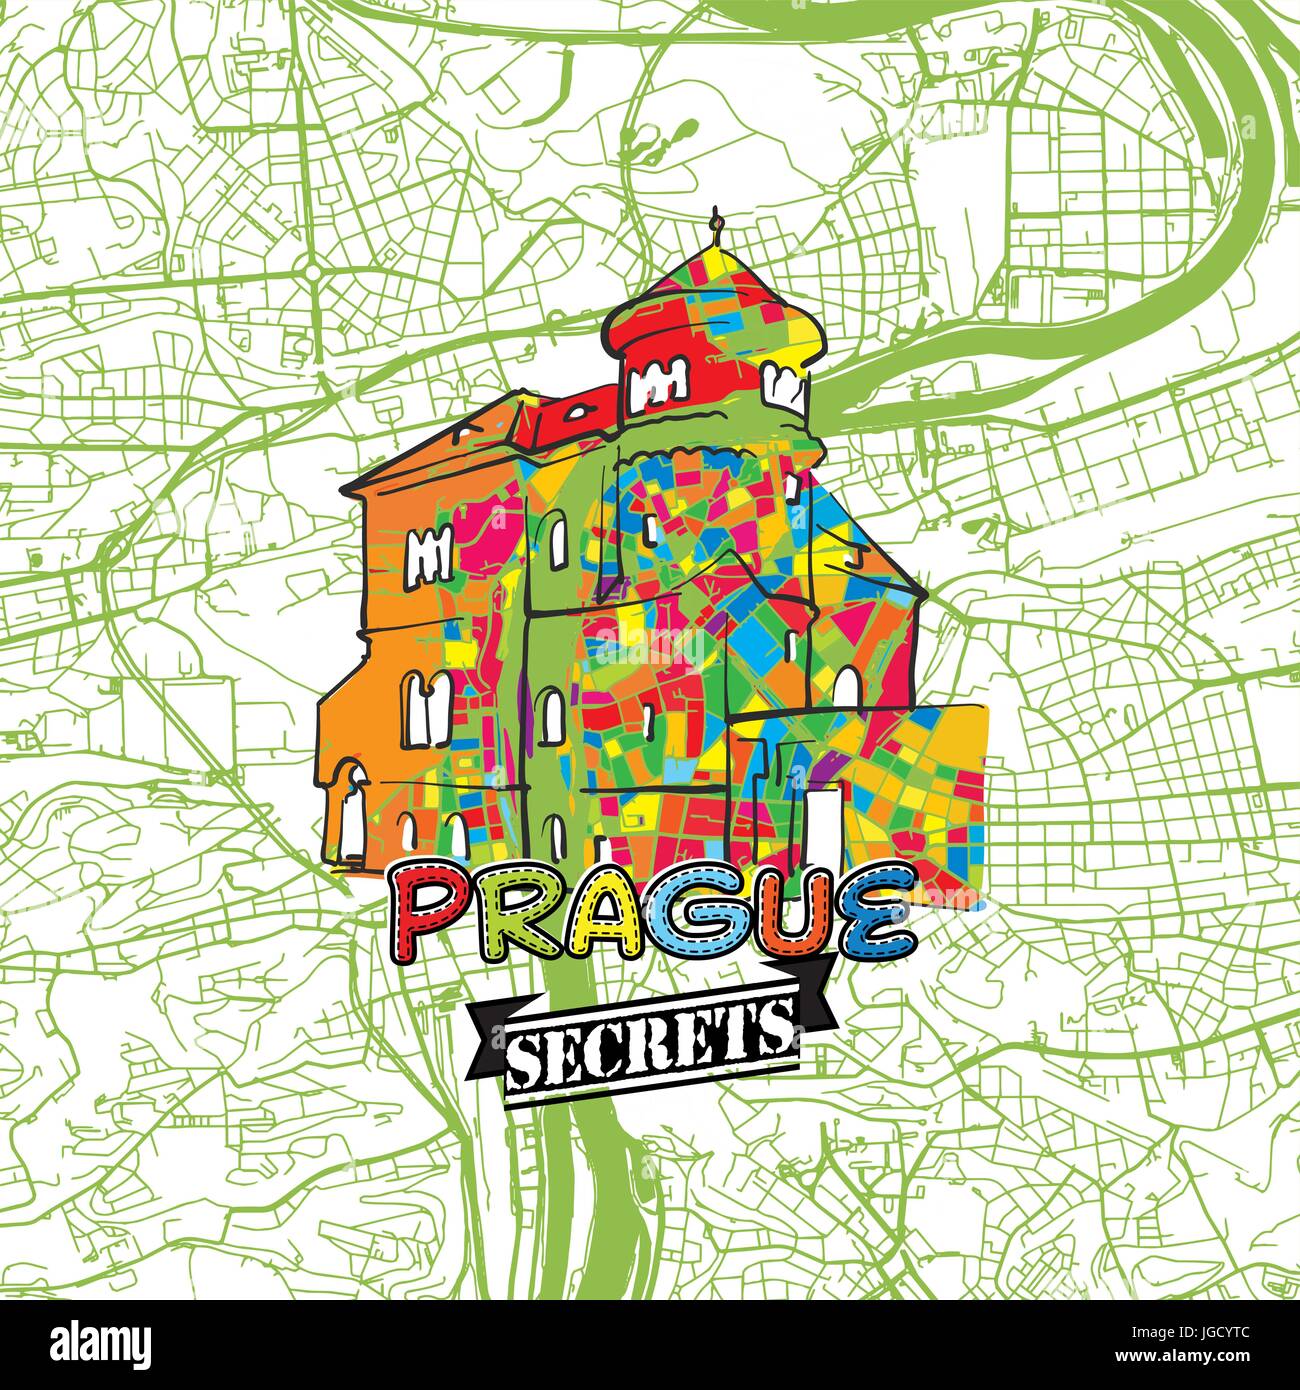 Prague Travel Secrets Art Map for mapping experts and travel guides. Handmade city logo, typo badge and hand drawn vector image on top are grouped and Stock Vector